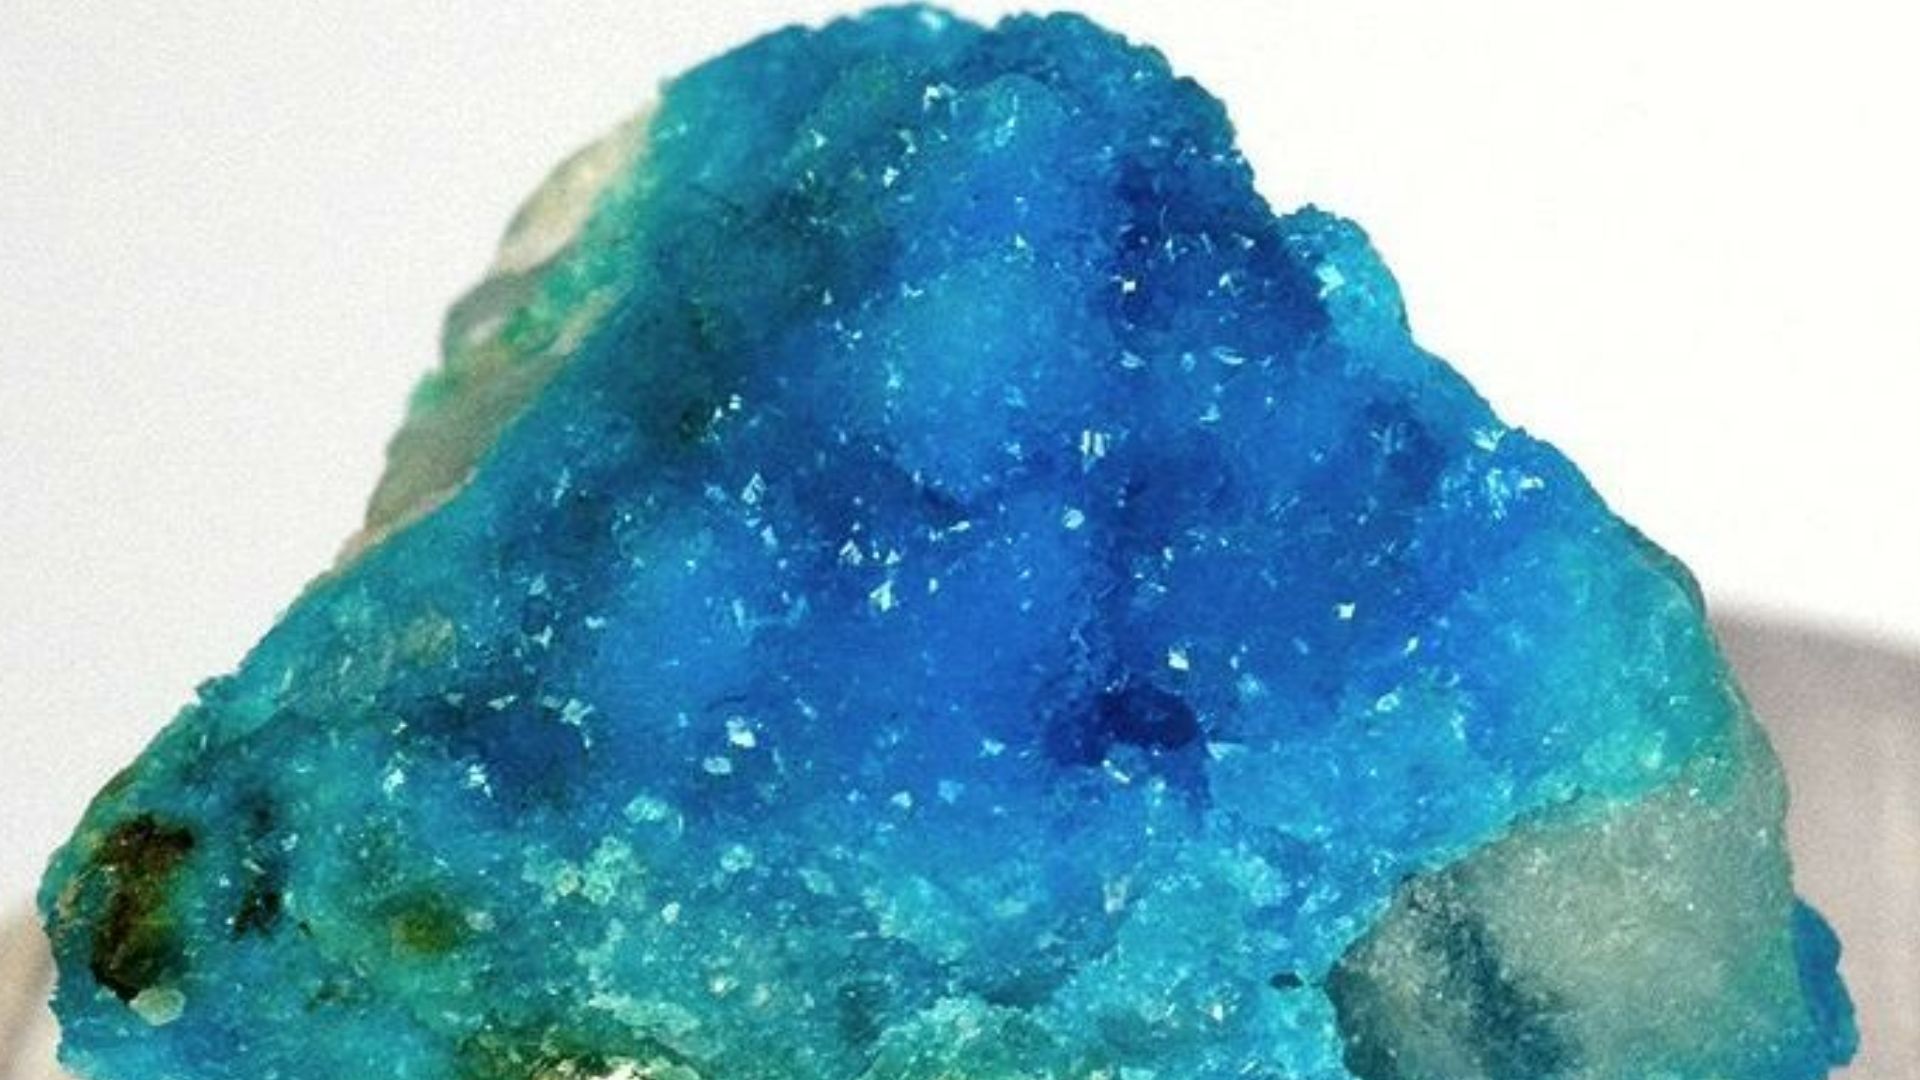 Turquoise And Amethyst - A Window Into Your Astrological Identity